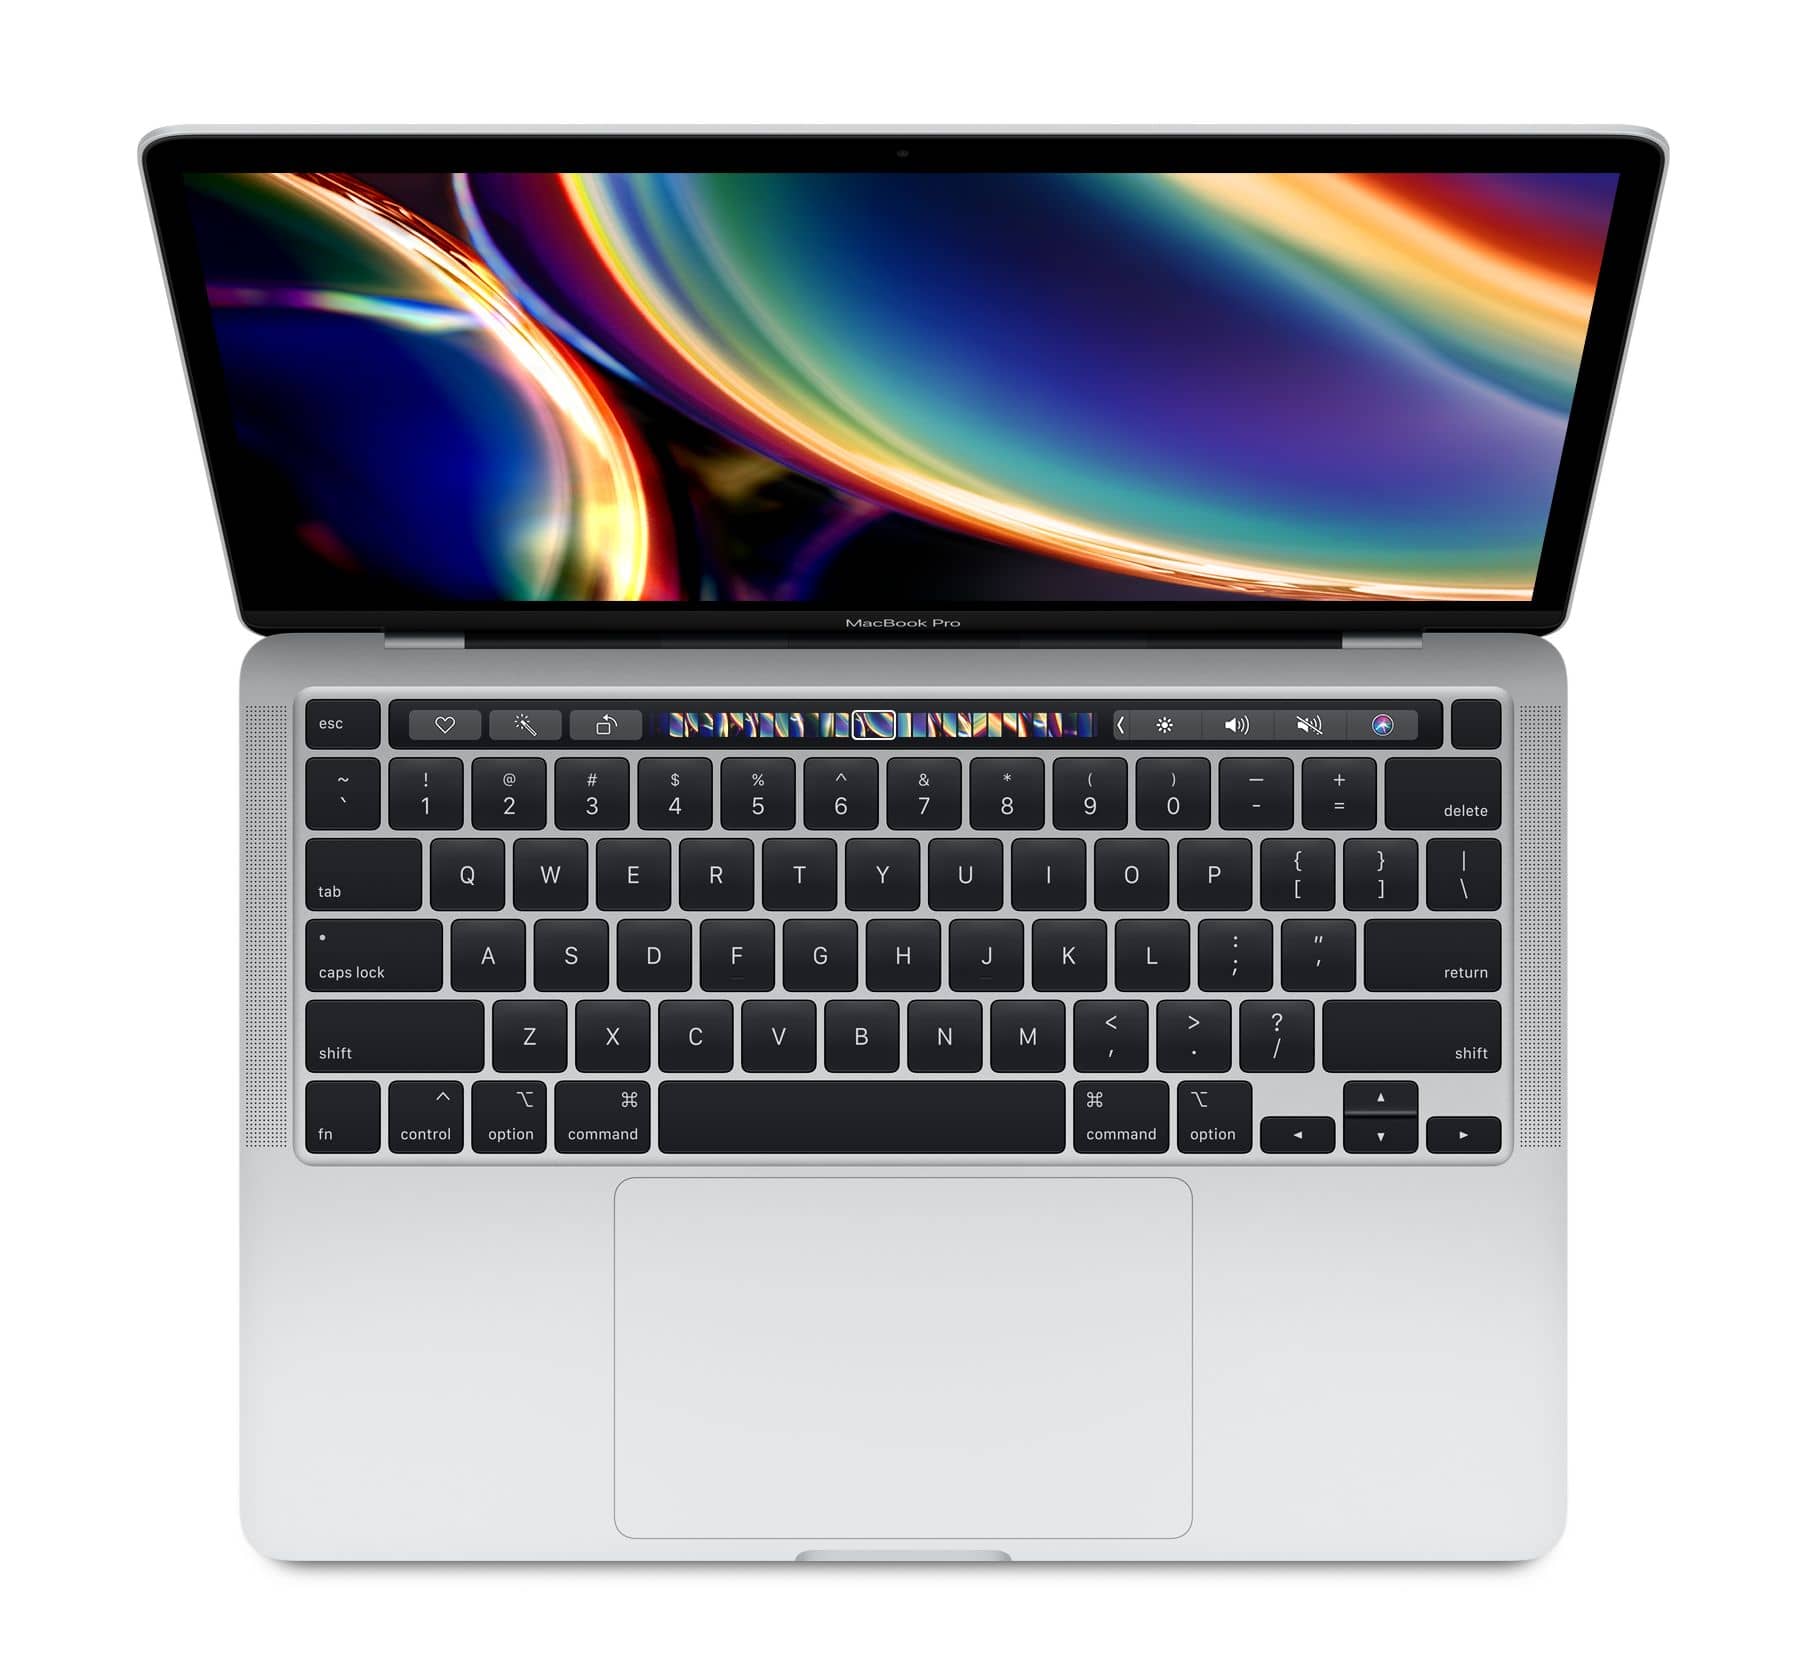 MacBook Pro 13 inch M1 2020 Technical Specifications